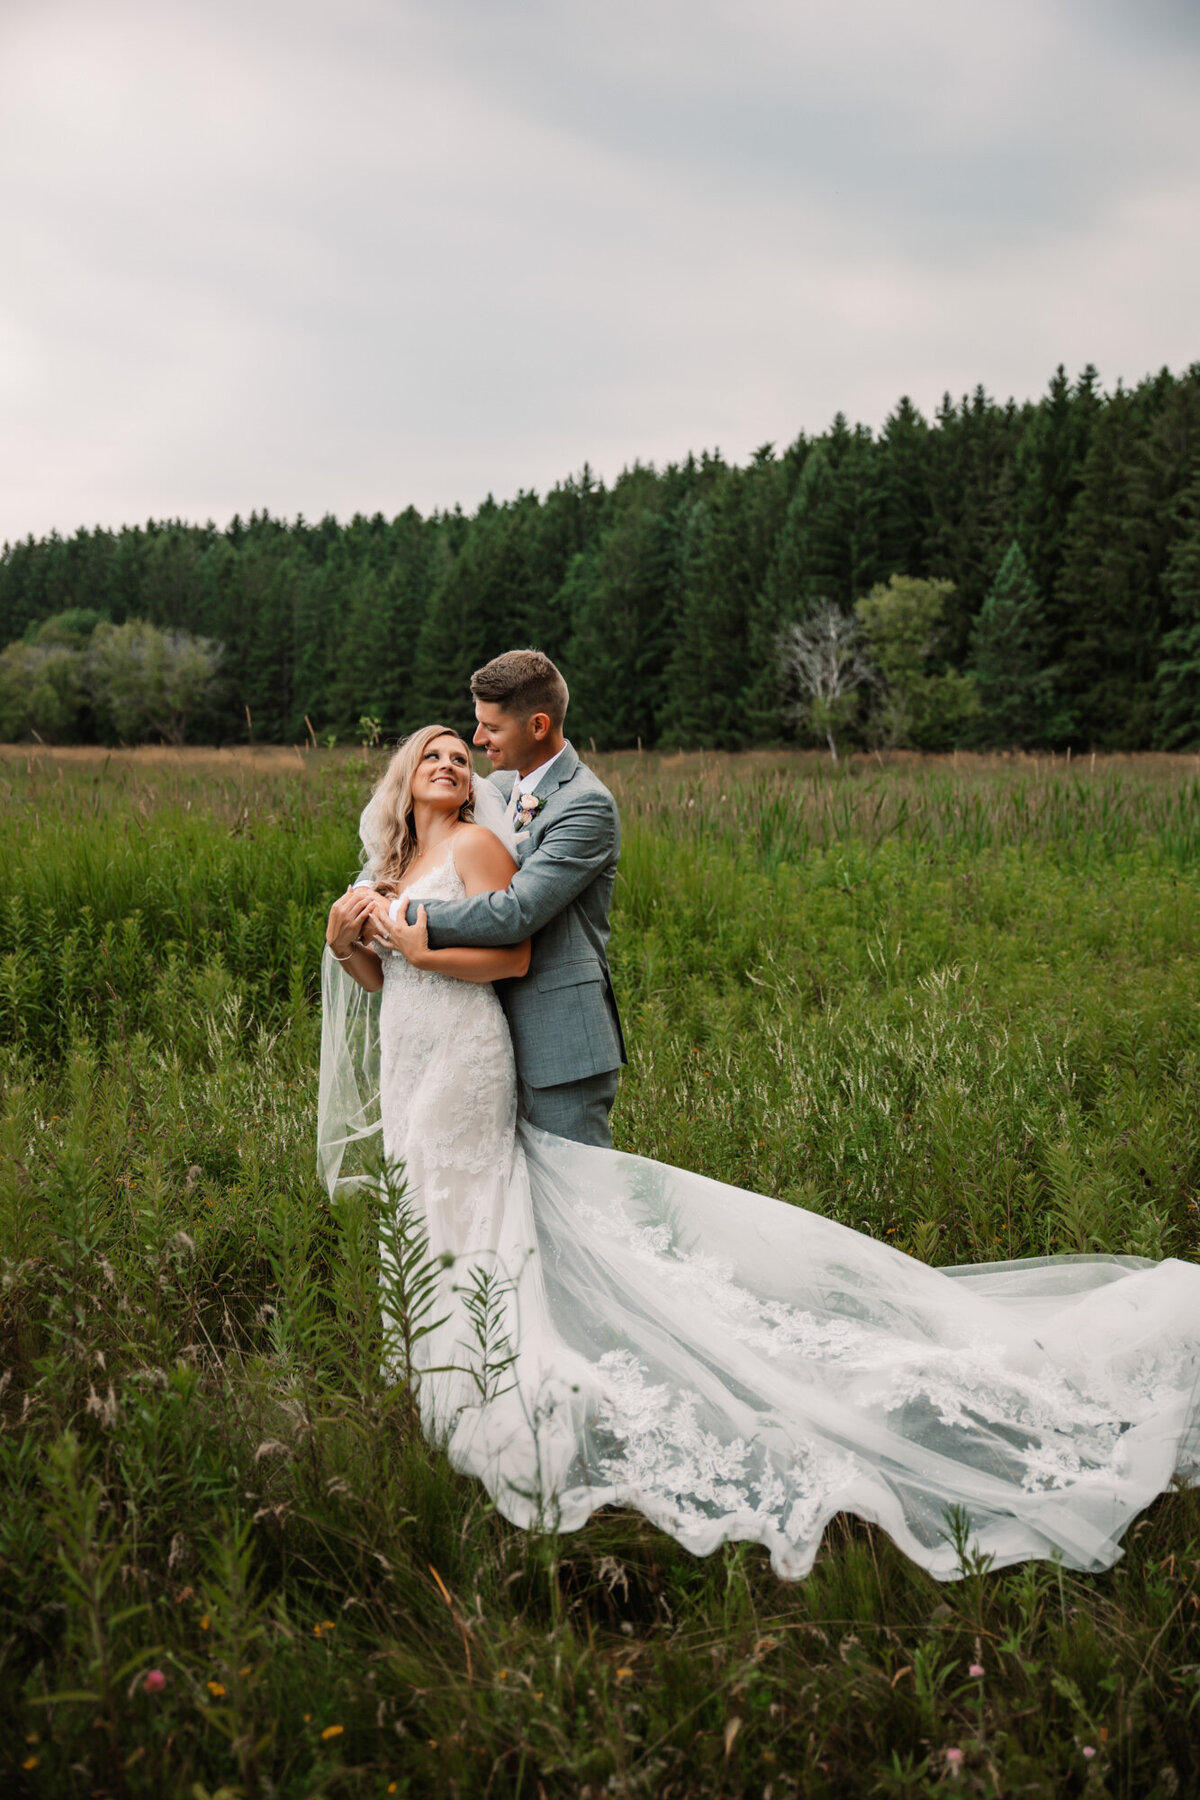 groom wraps his arm around bride from behind in a field of green while brides dress flows in the grass